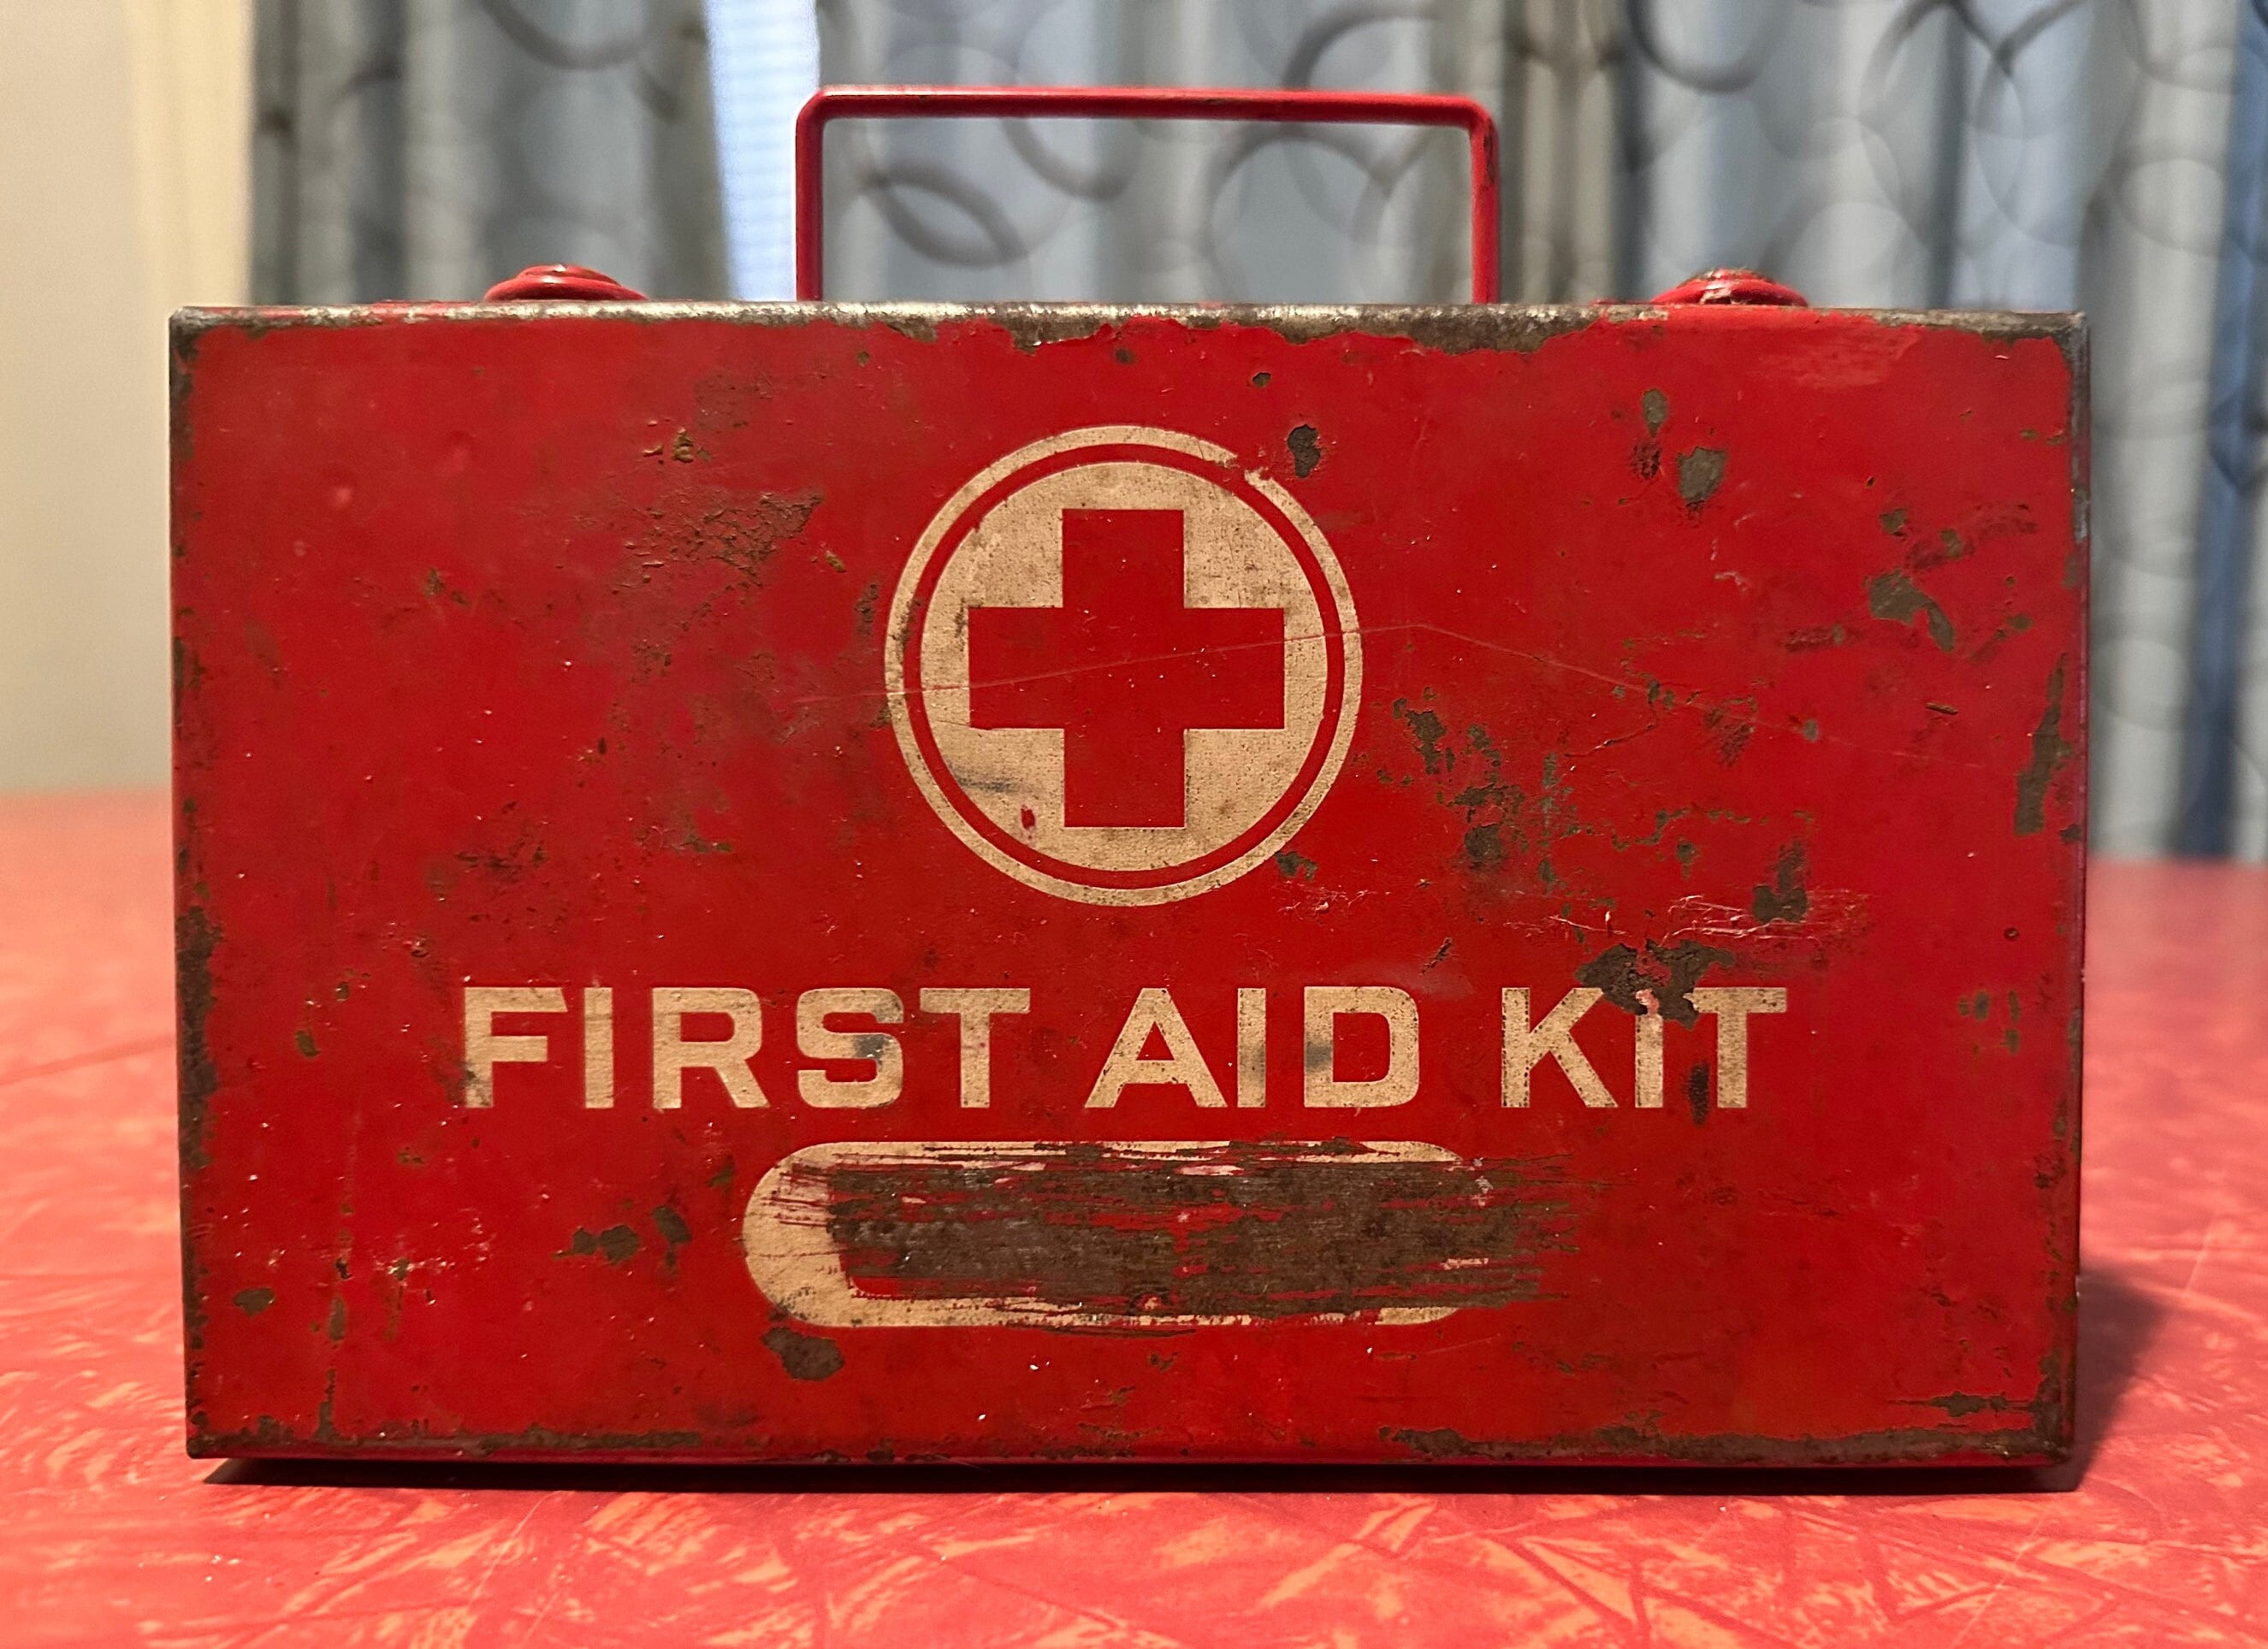 OLD American Red Cross First Aid Patch: EMERGENCY FIRST AID 1950s